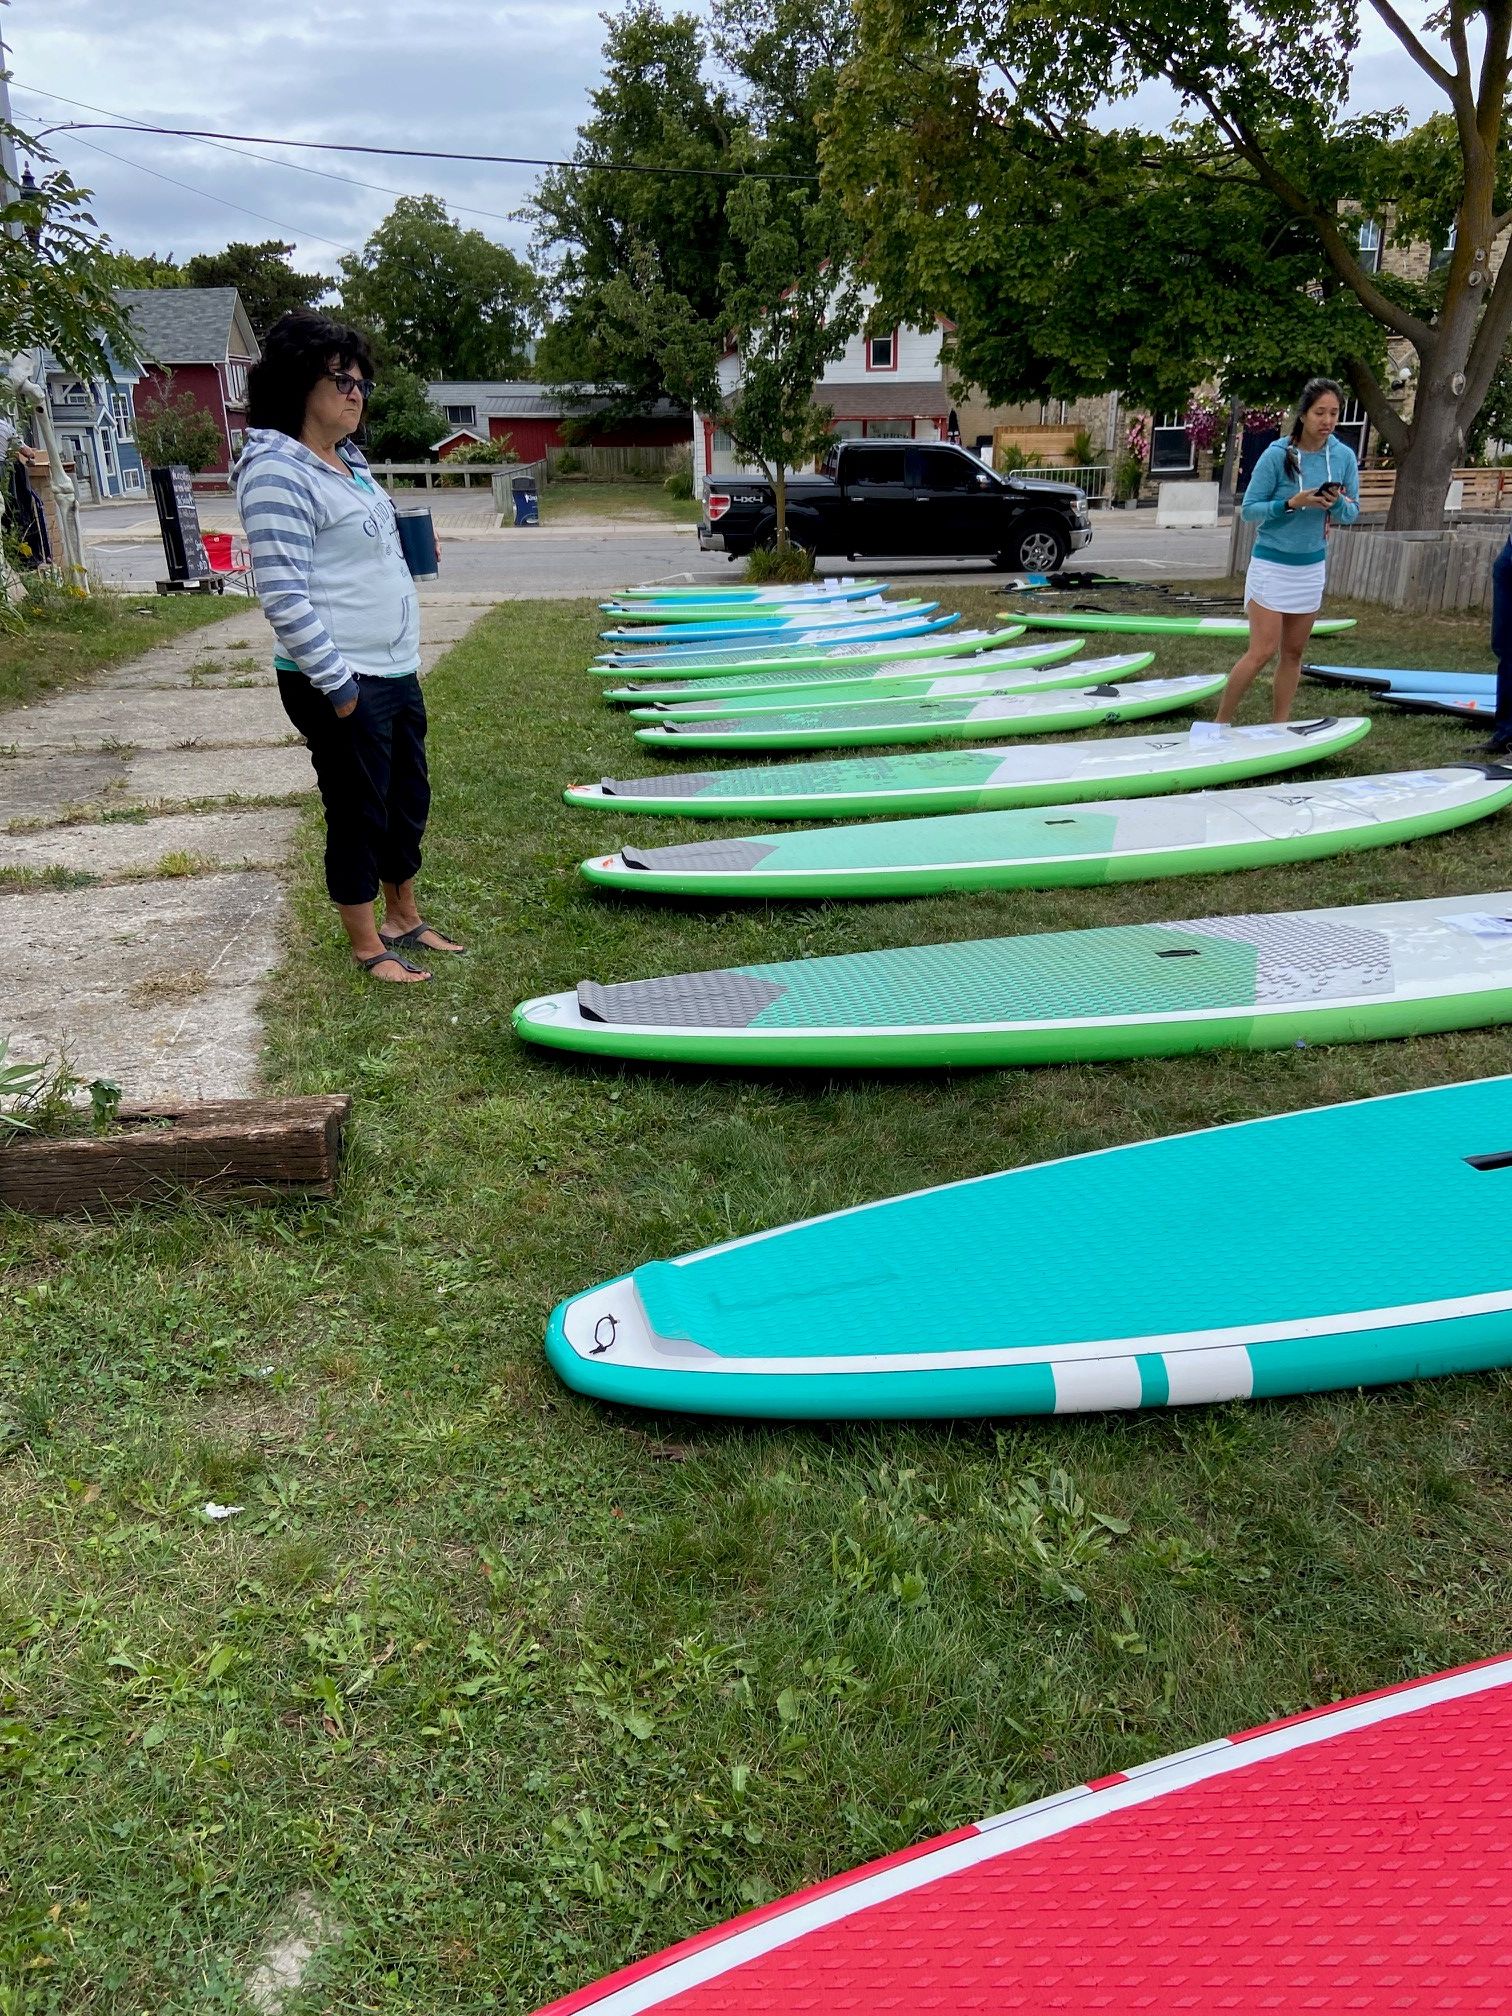 Paddleboards laid out for sale | Choosing the right Length of paddle board